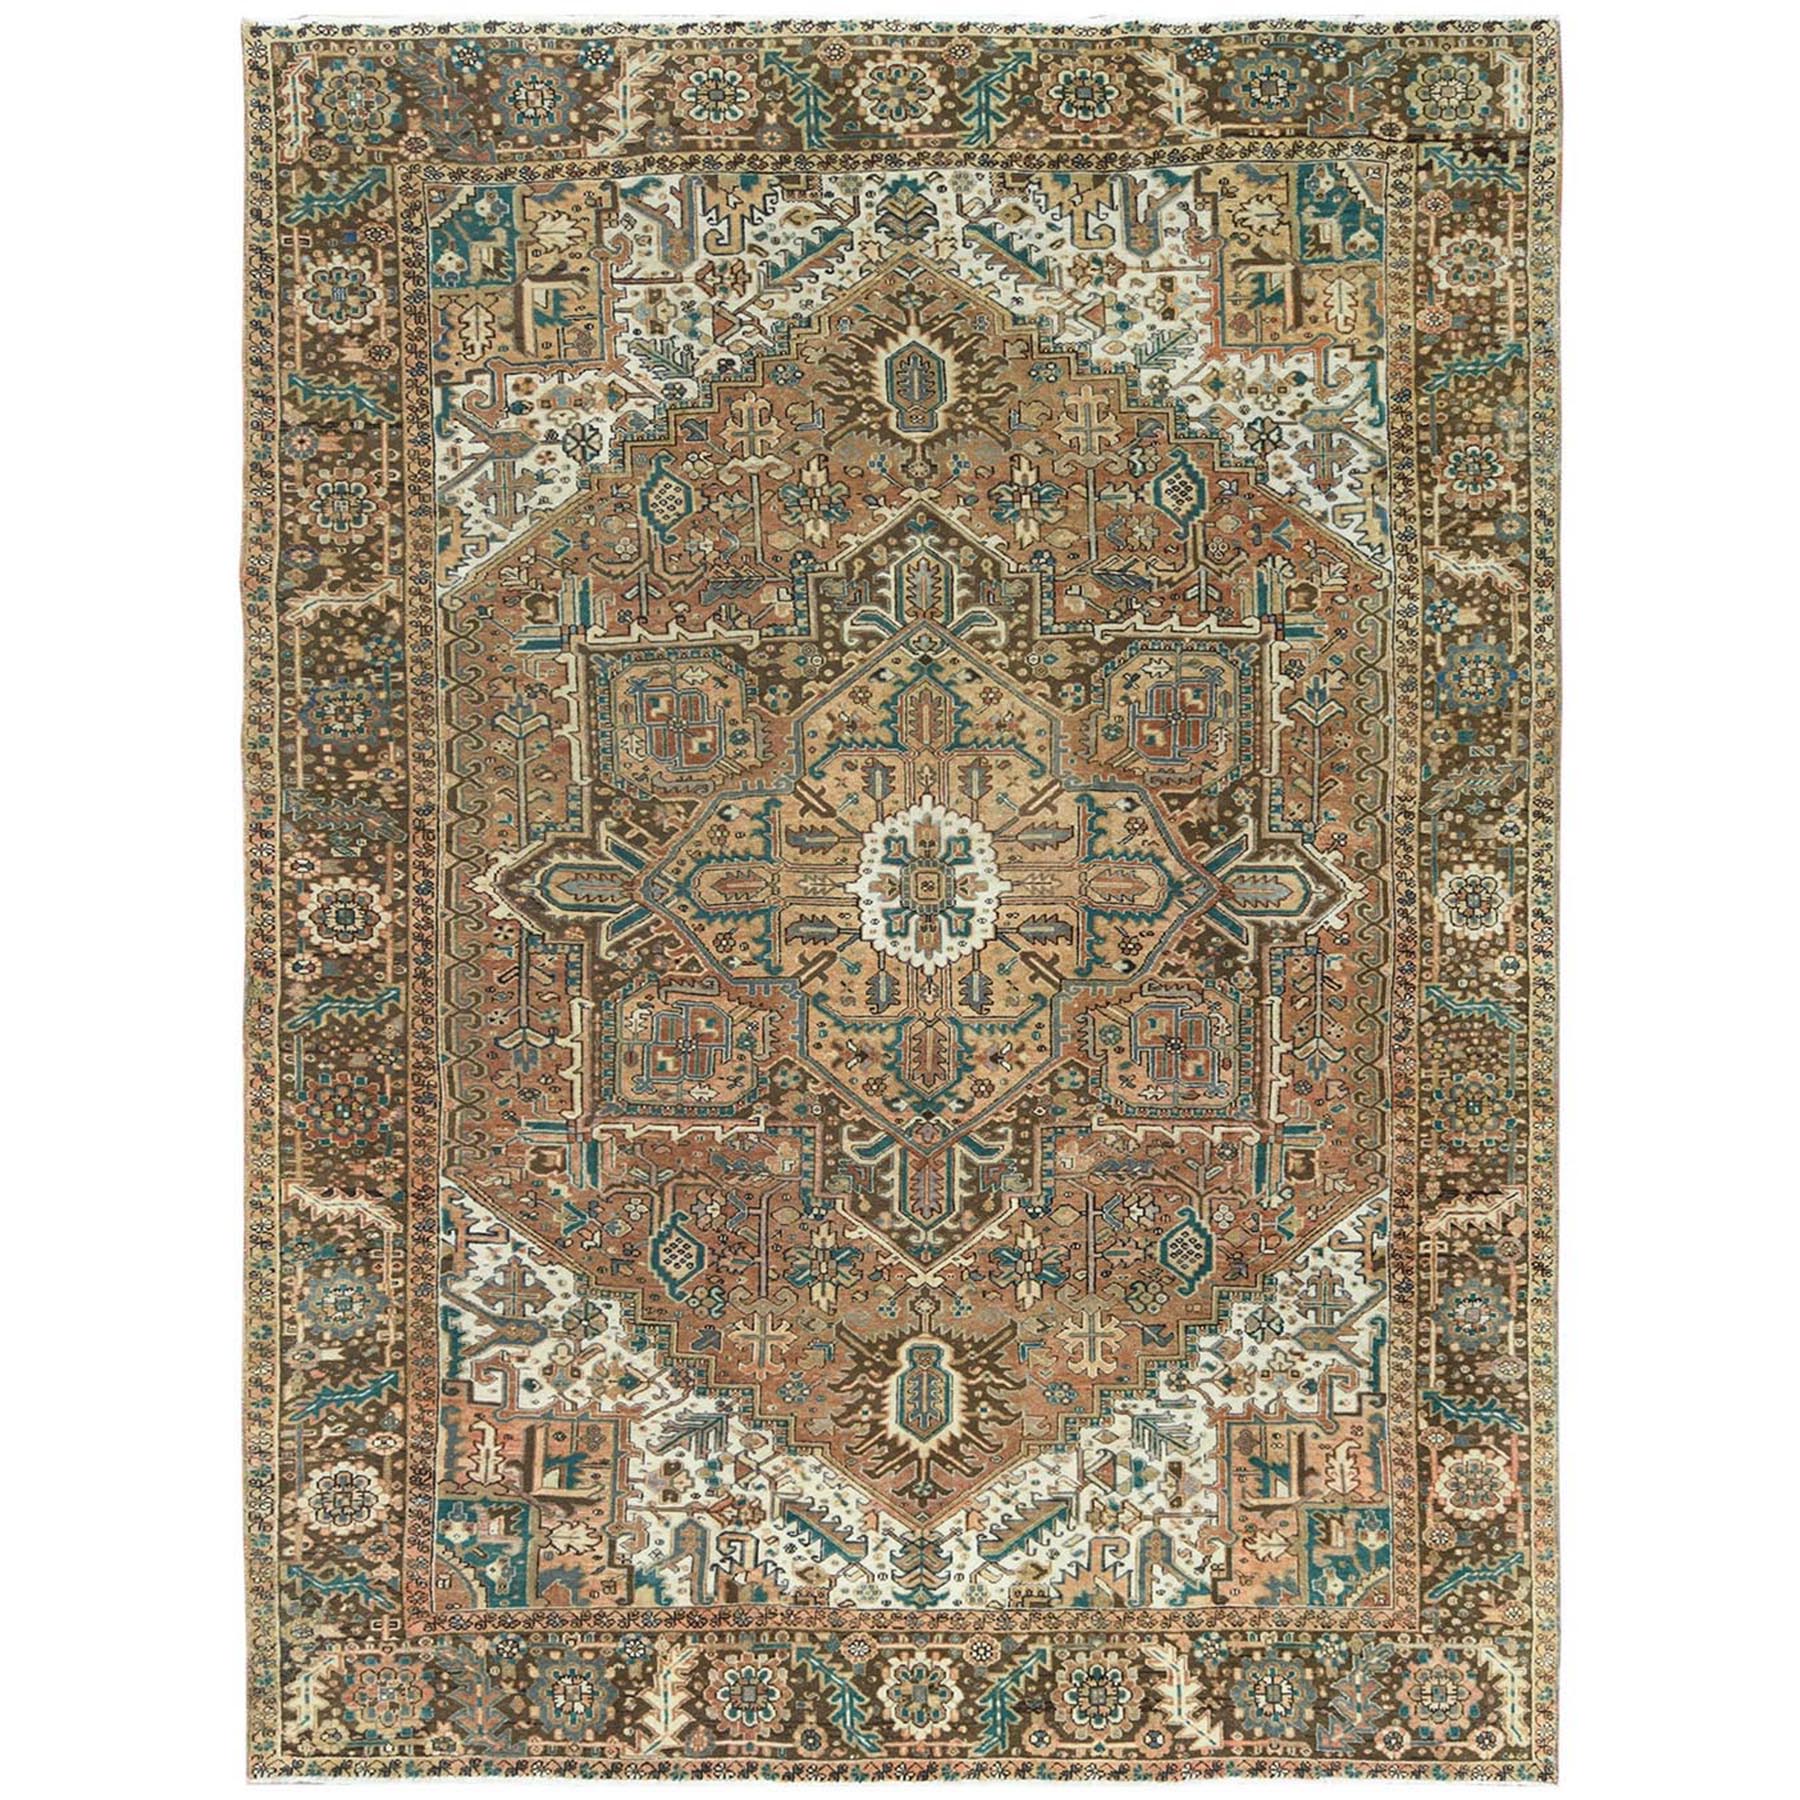  Wool Hand-Knotted Area Rug 9'4